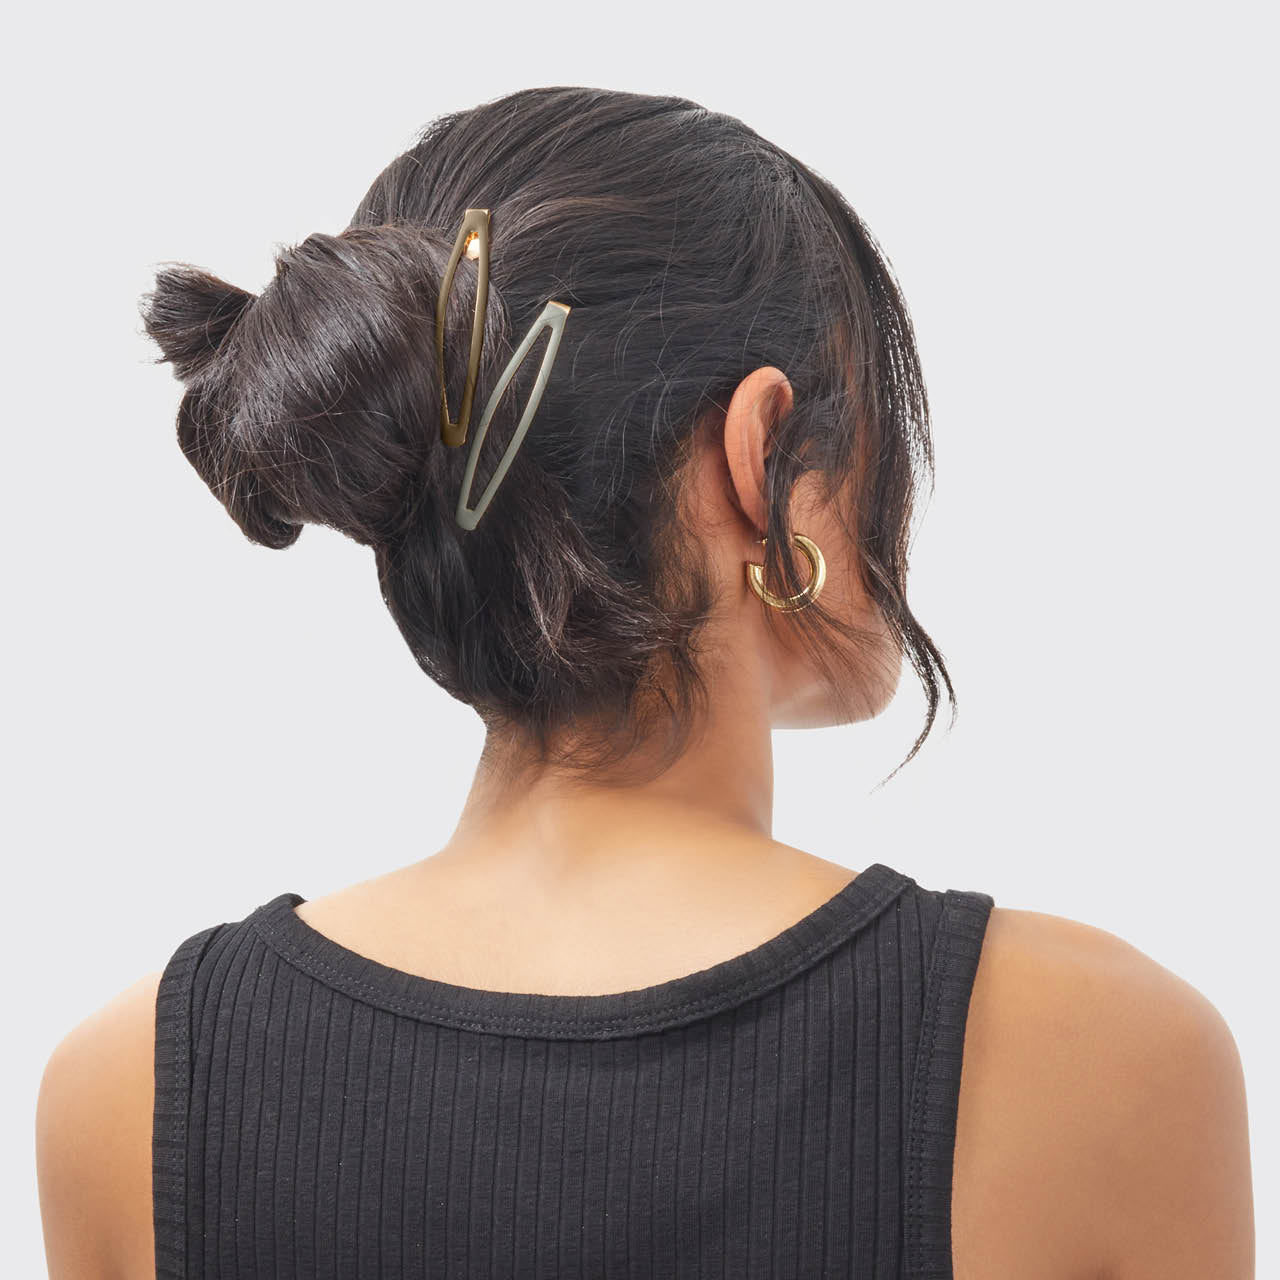 The Best Hair Clips for Thick Hair